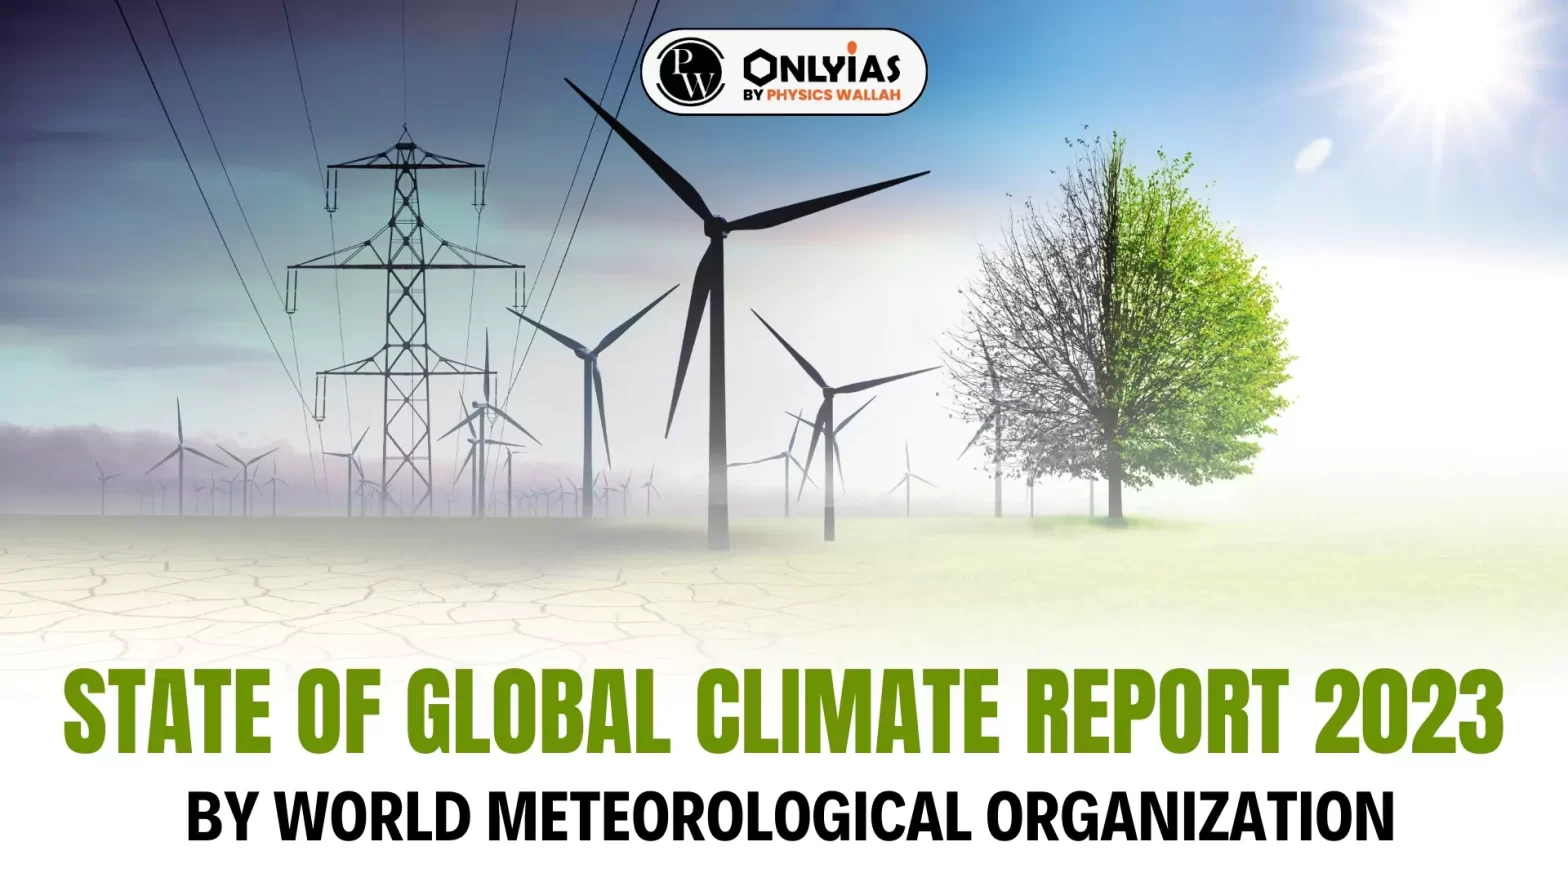 State of Global Climate Report 2023: By World Meteorological Organization